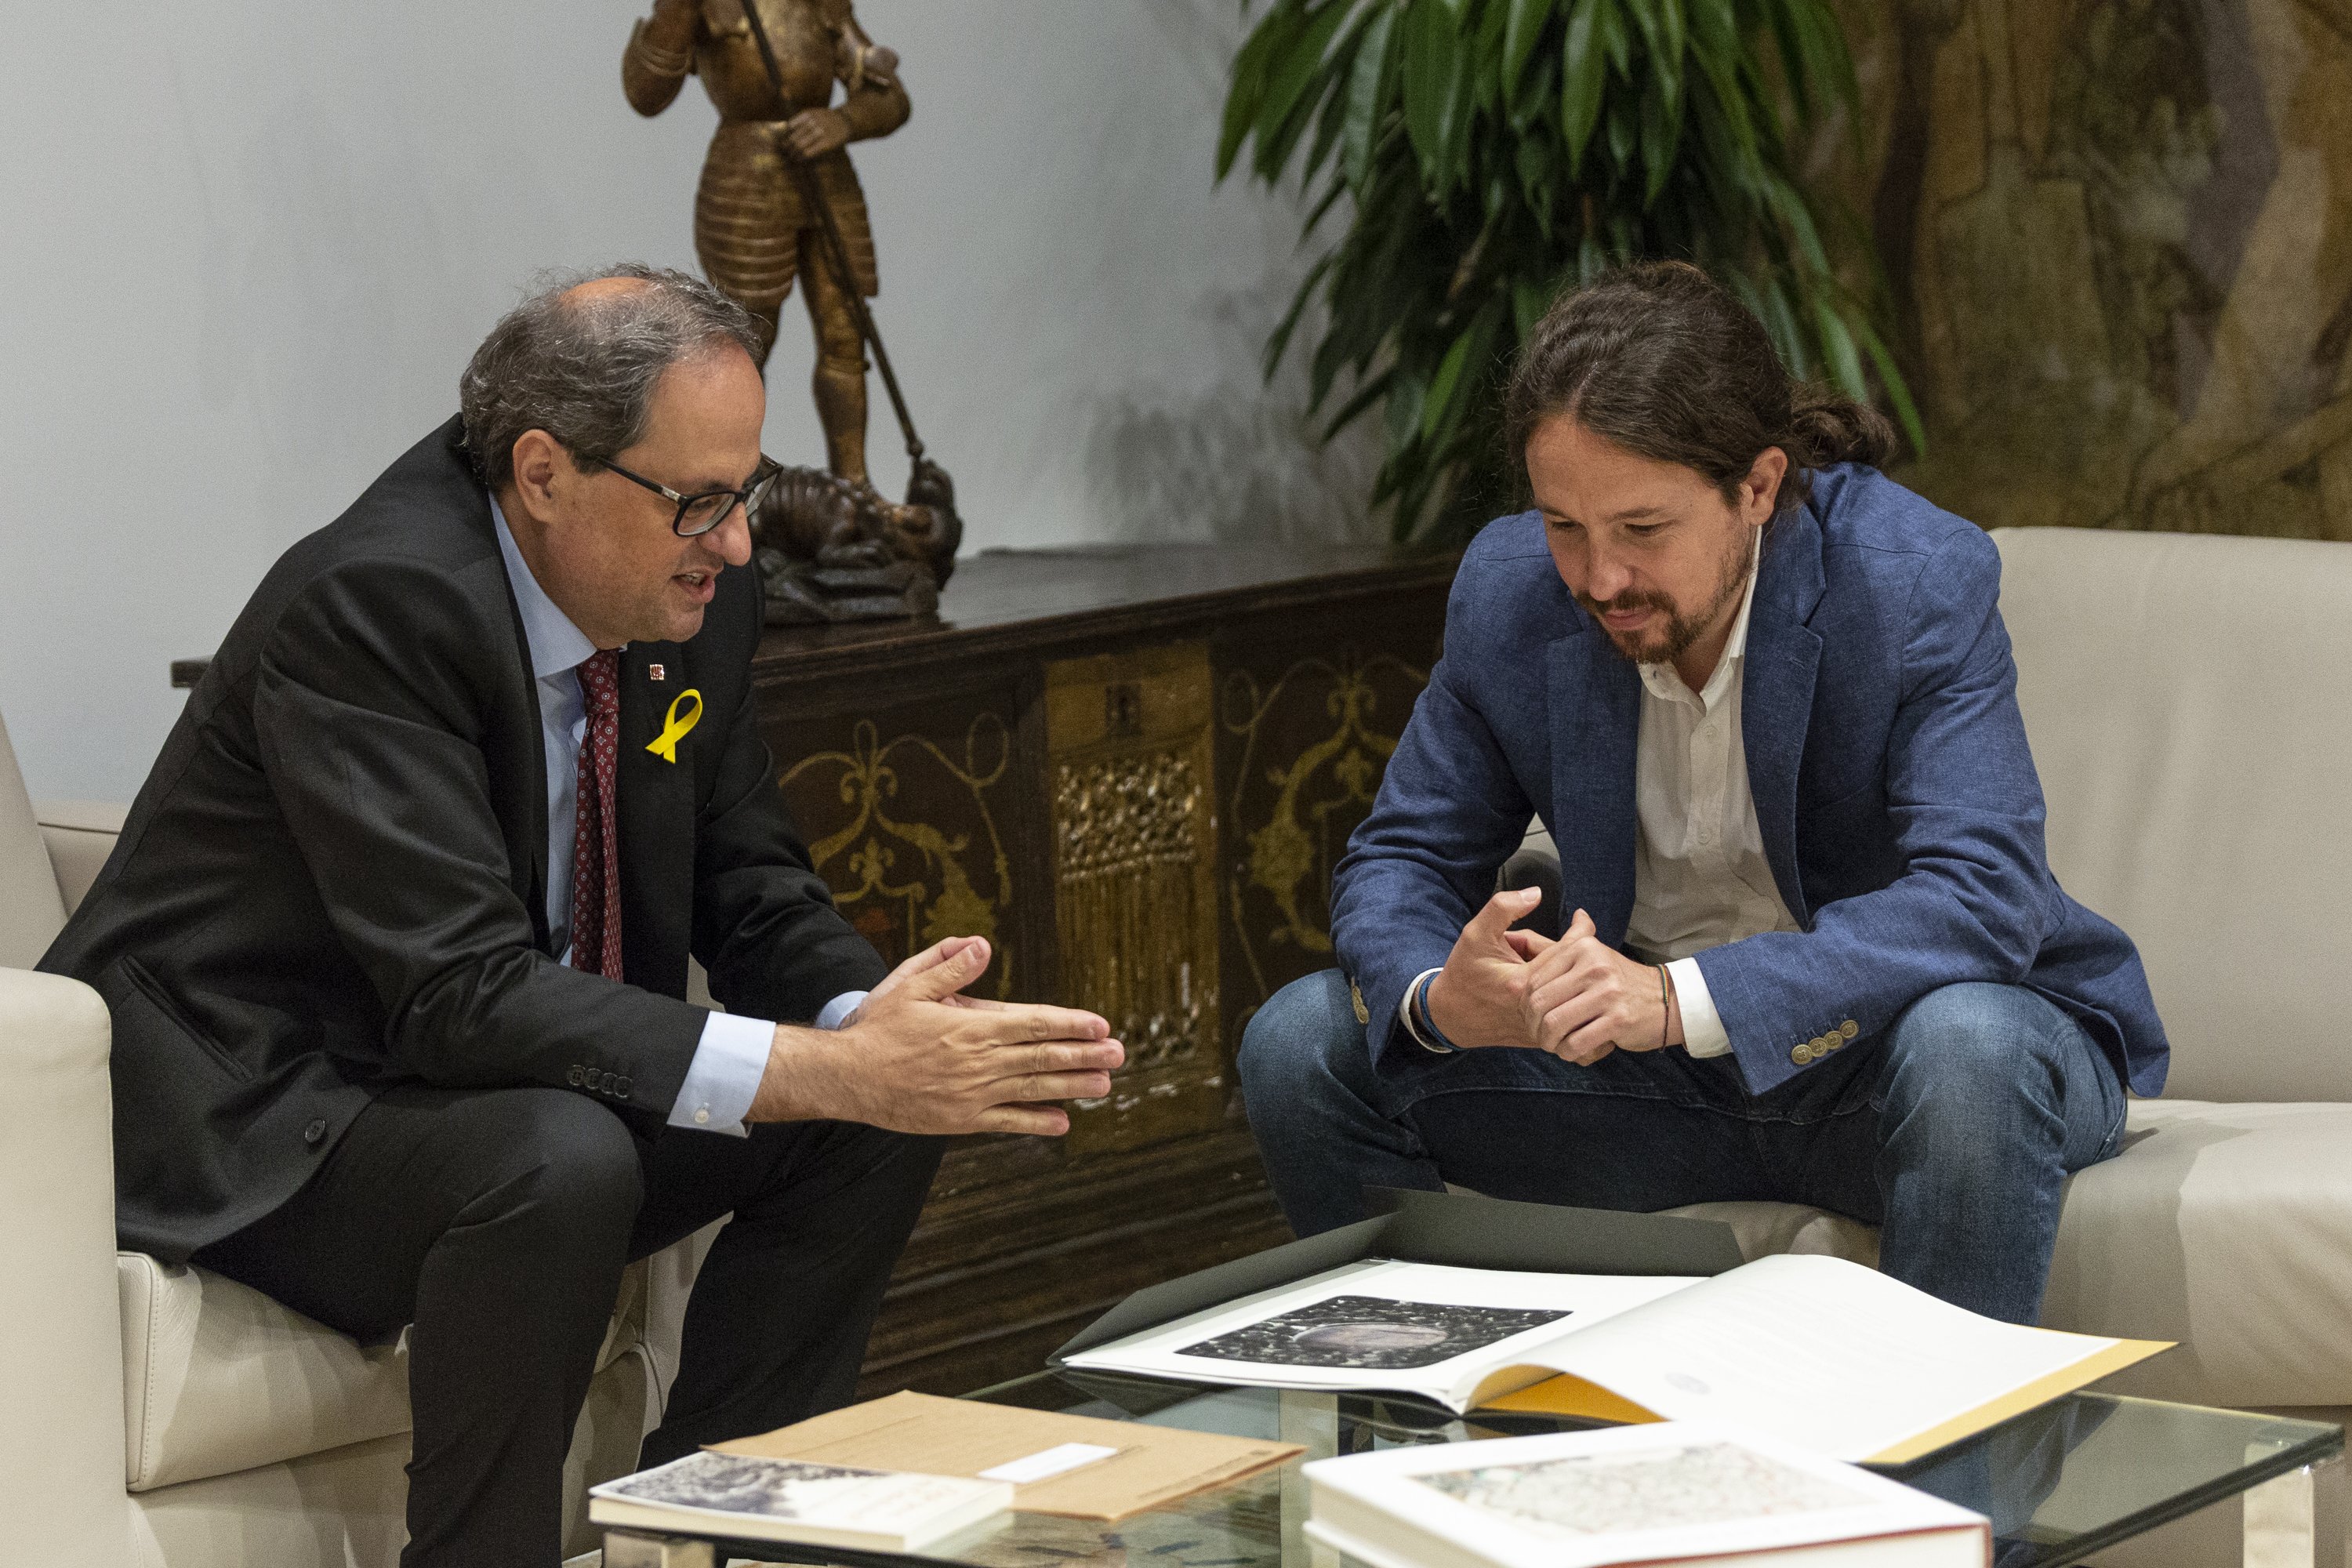 Iglesias to Torra: "Only under republican values can Spain and Catalonia share a state"